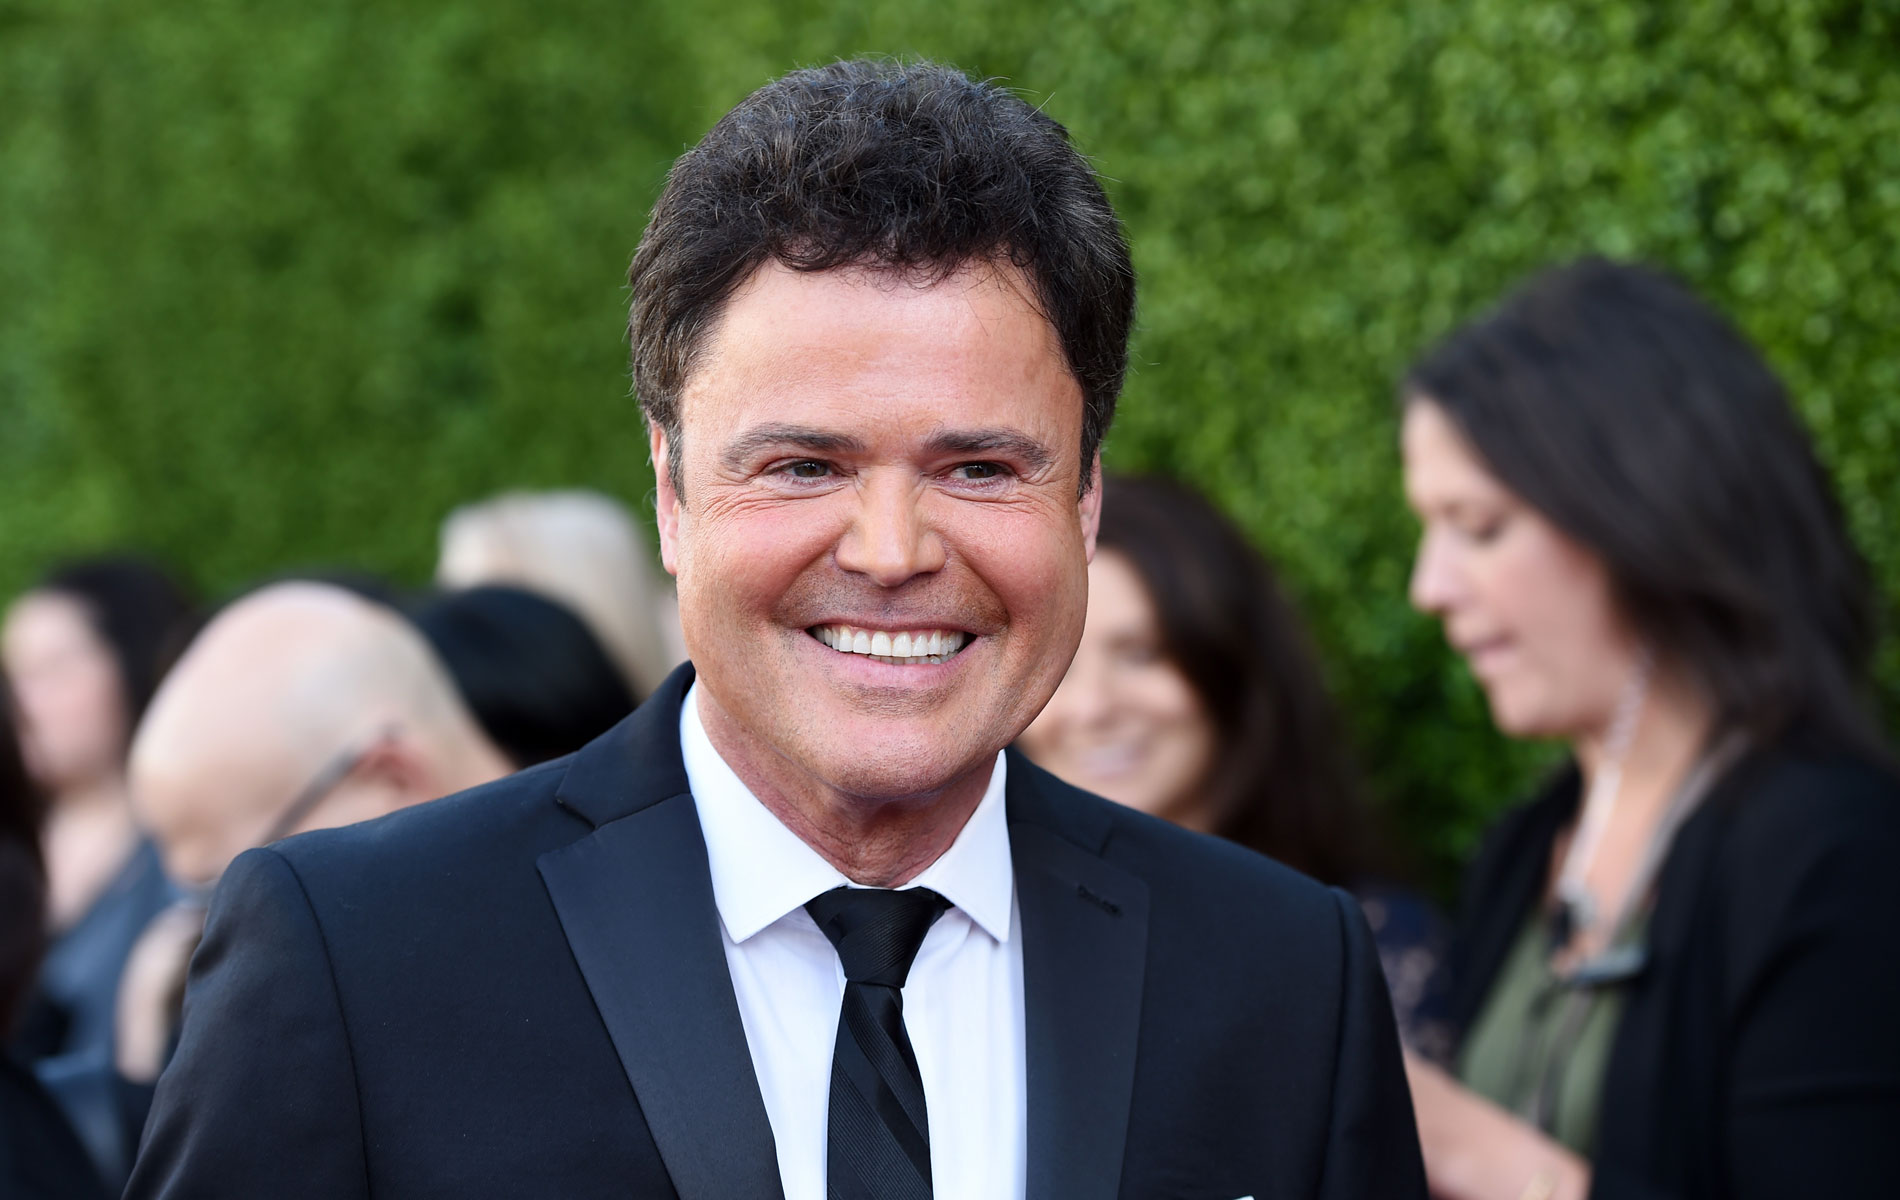 What disease does Donny Osmond have?